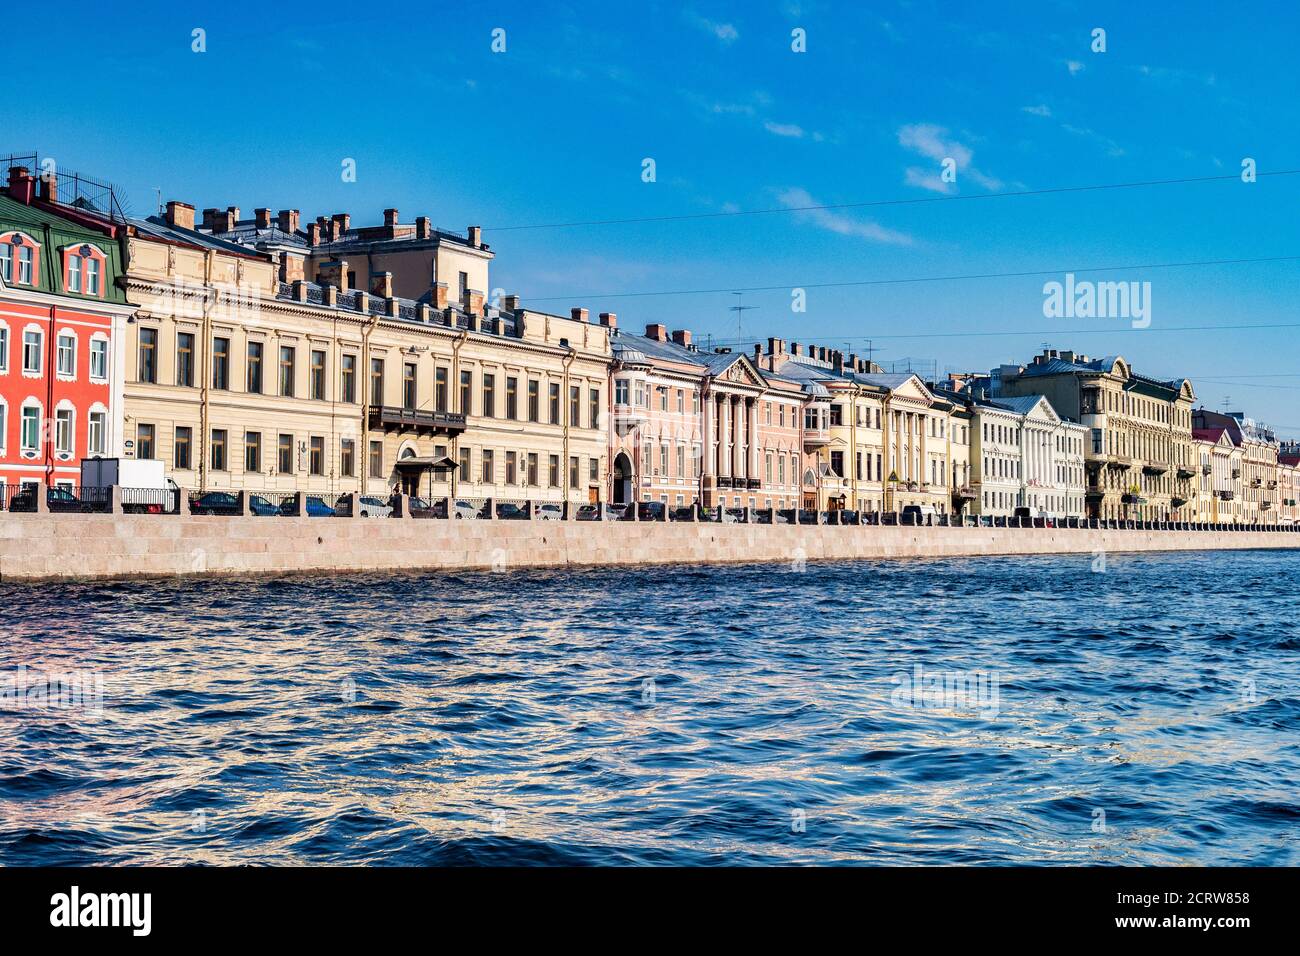 19 September 2018: St Petersburg, Russia - Typical palatial buildings beside the River Neva. Stock Photo